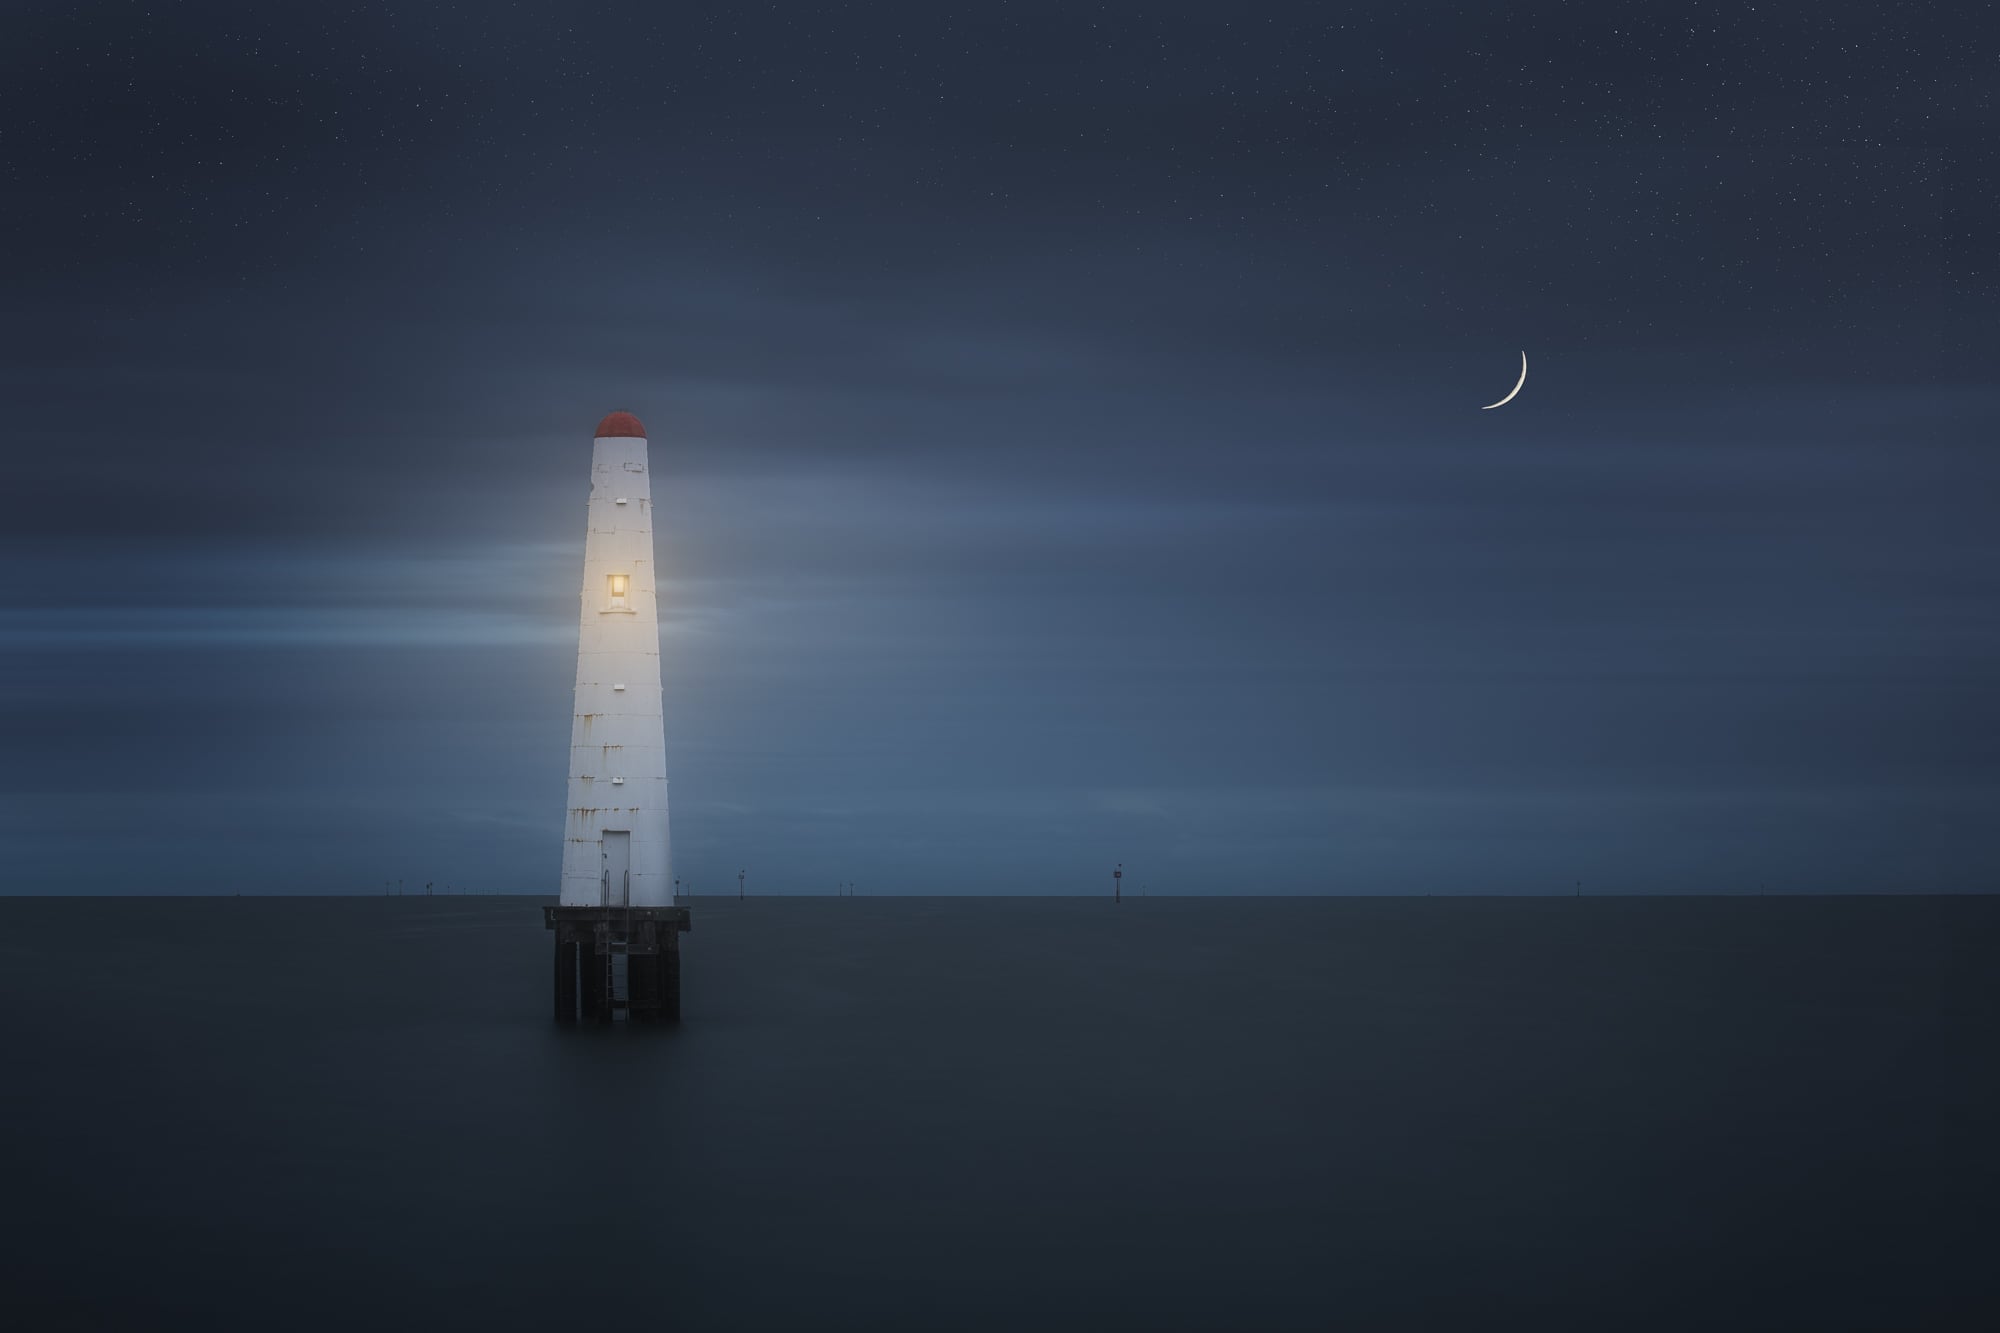 A lone lighthouse illuminated on Princess Pier in Melbourne against a starry night sky with a crescent moon.